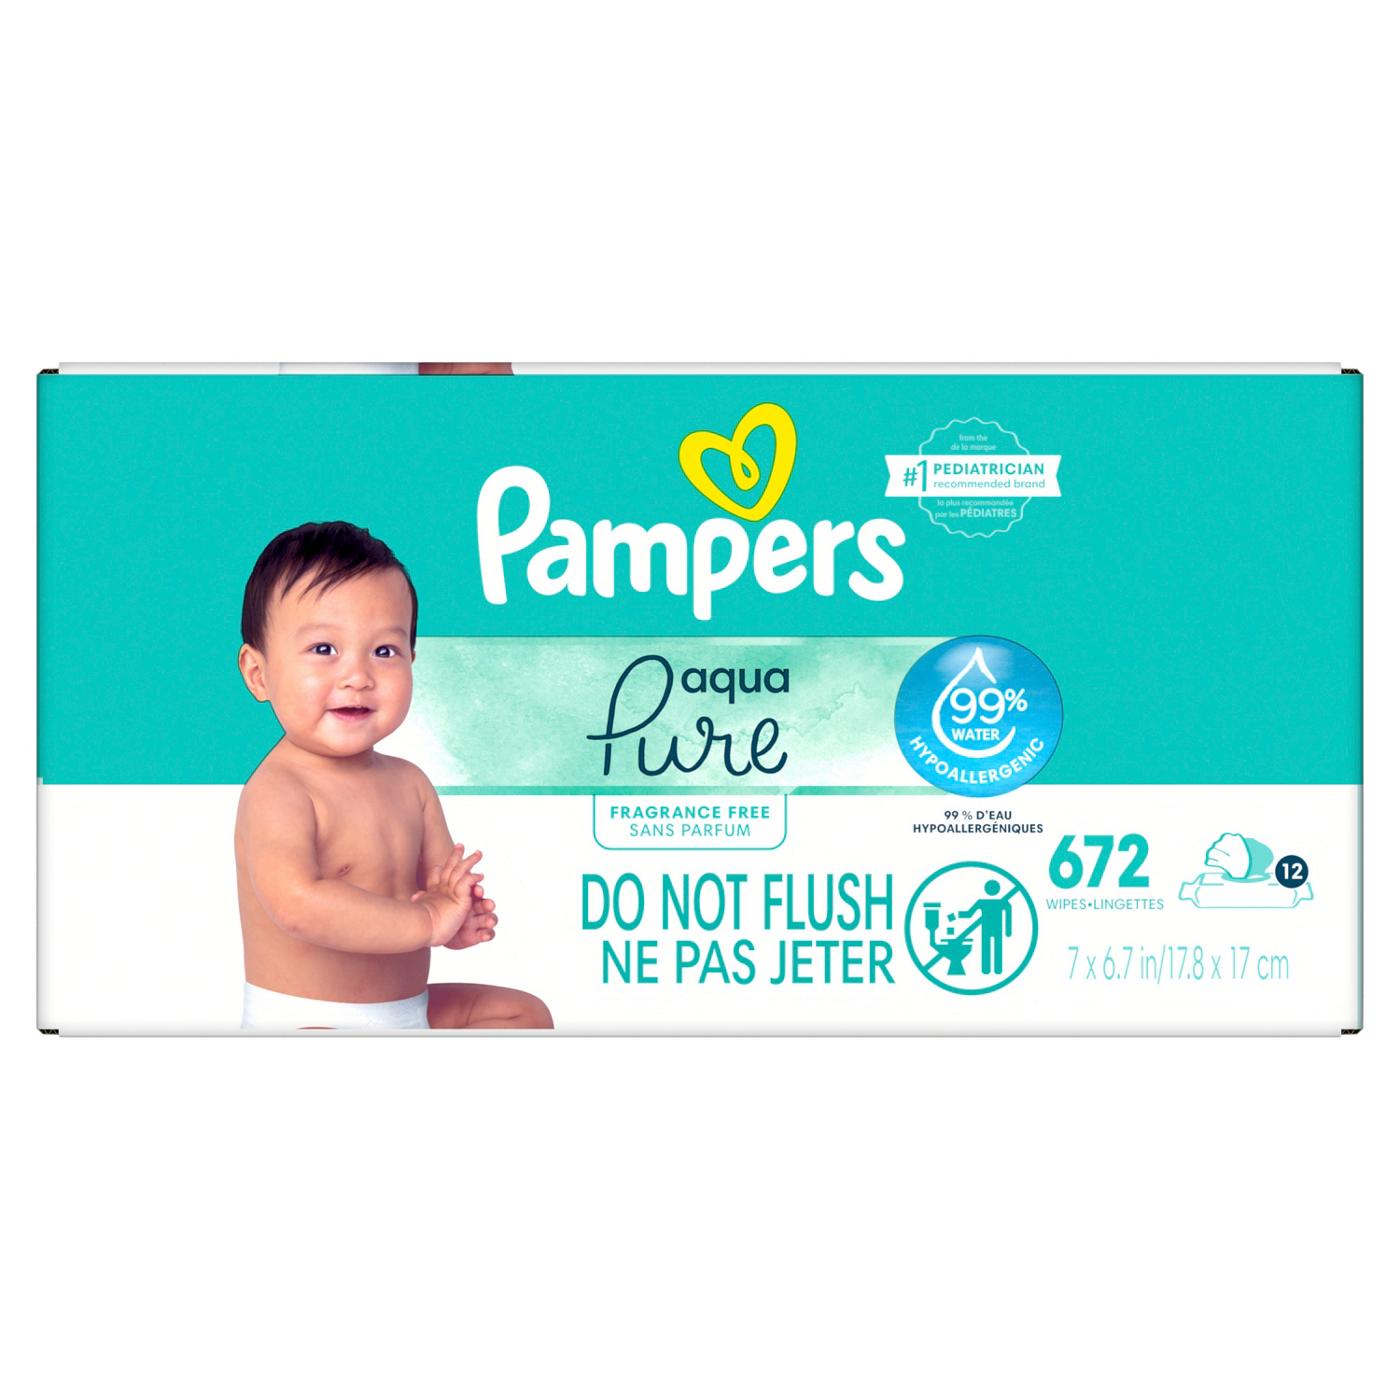 Pampers Aqua Pure Baby Wipes 12 pk; image 2 of 9